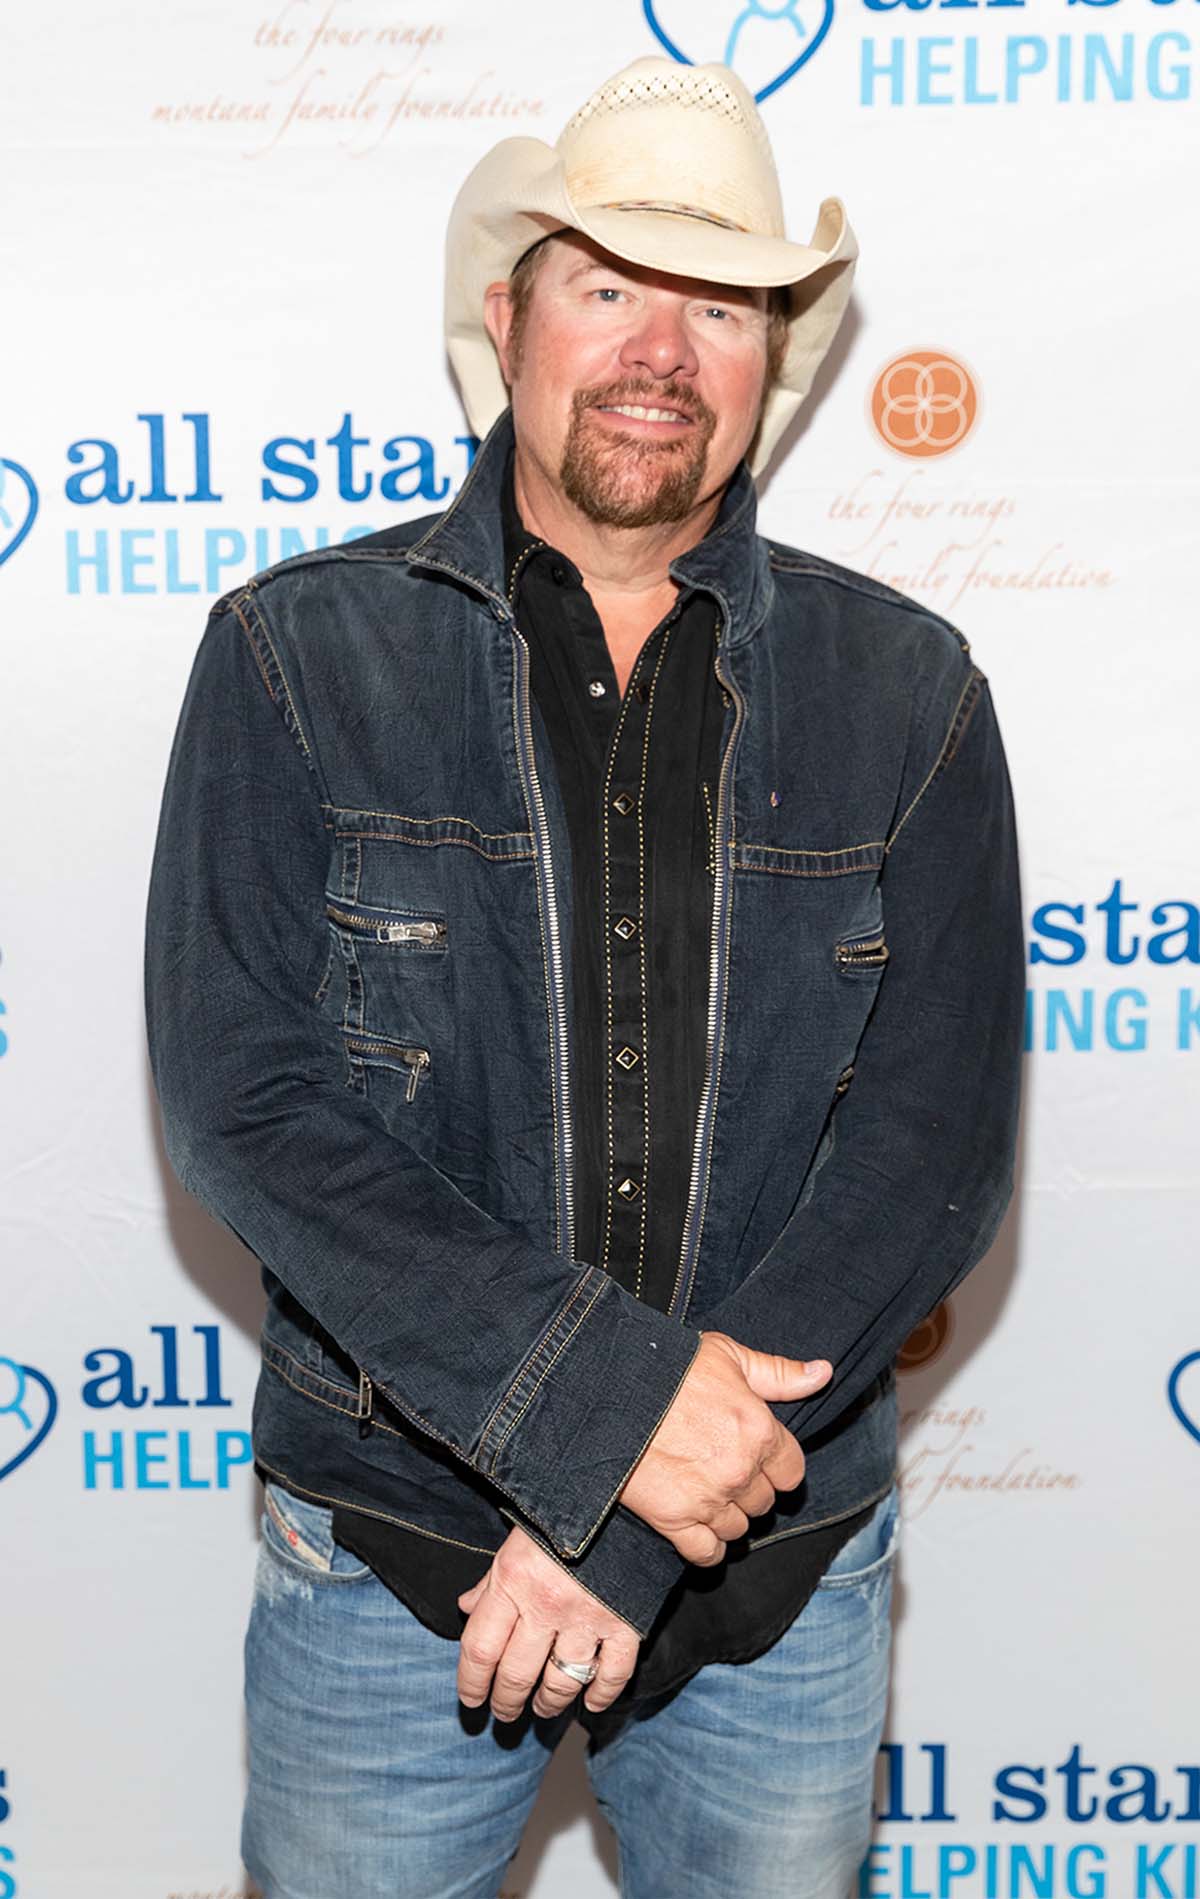 Toby Keith - Exclusive Interviews, Pictures & More